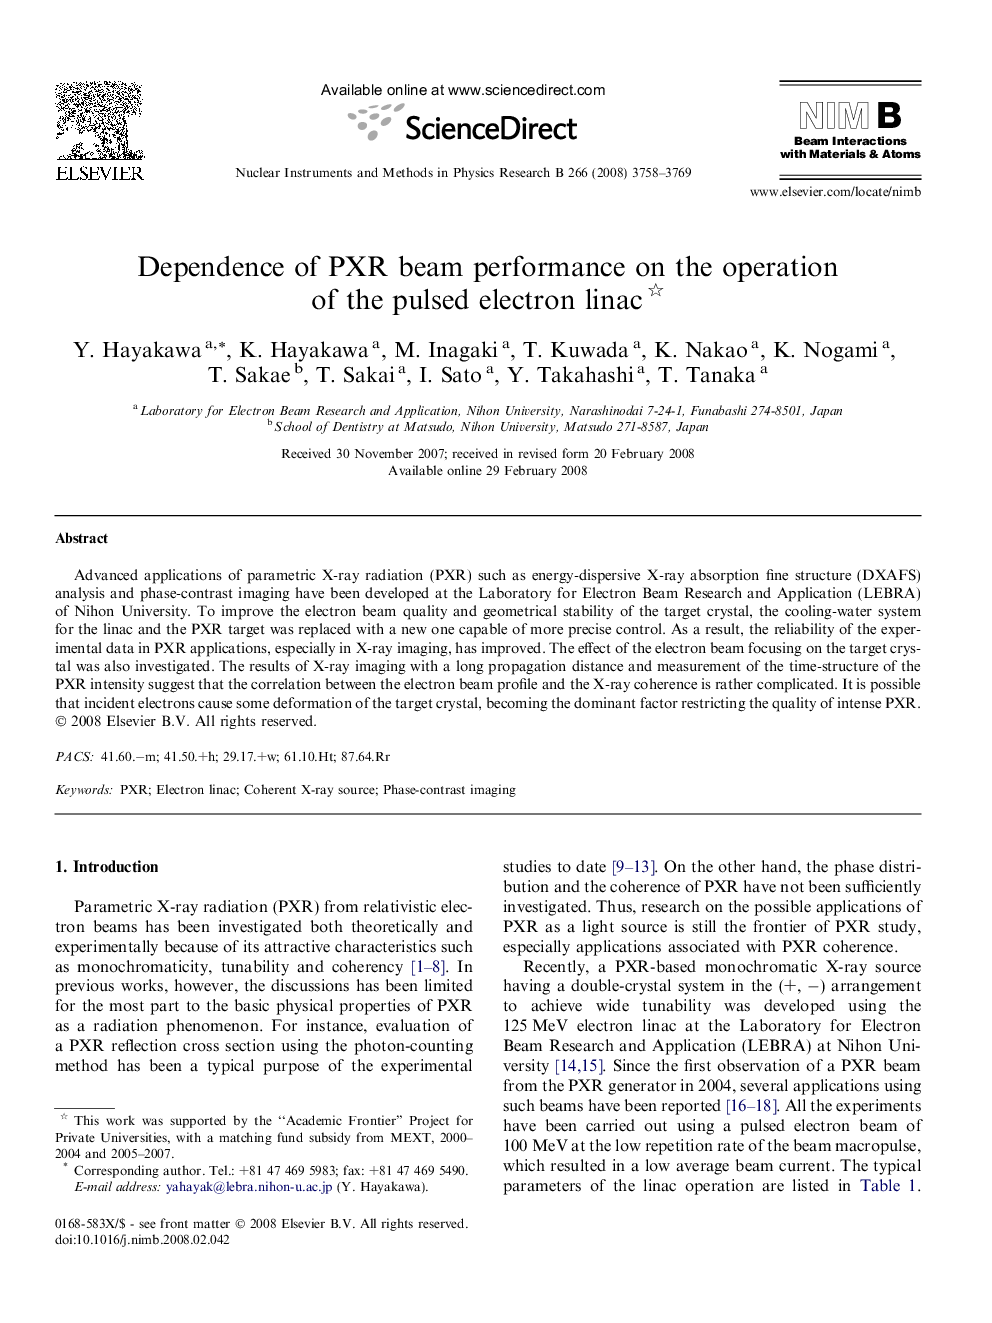 Dependence of PXR beam performance on the operation of the pulsed electron linac 